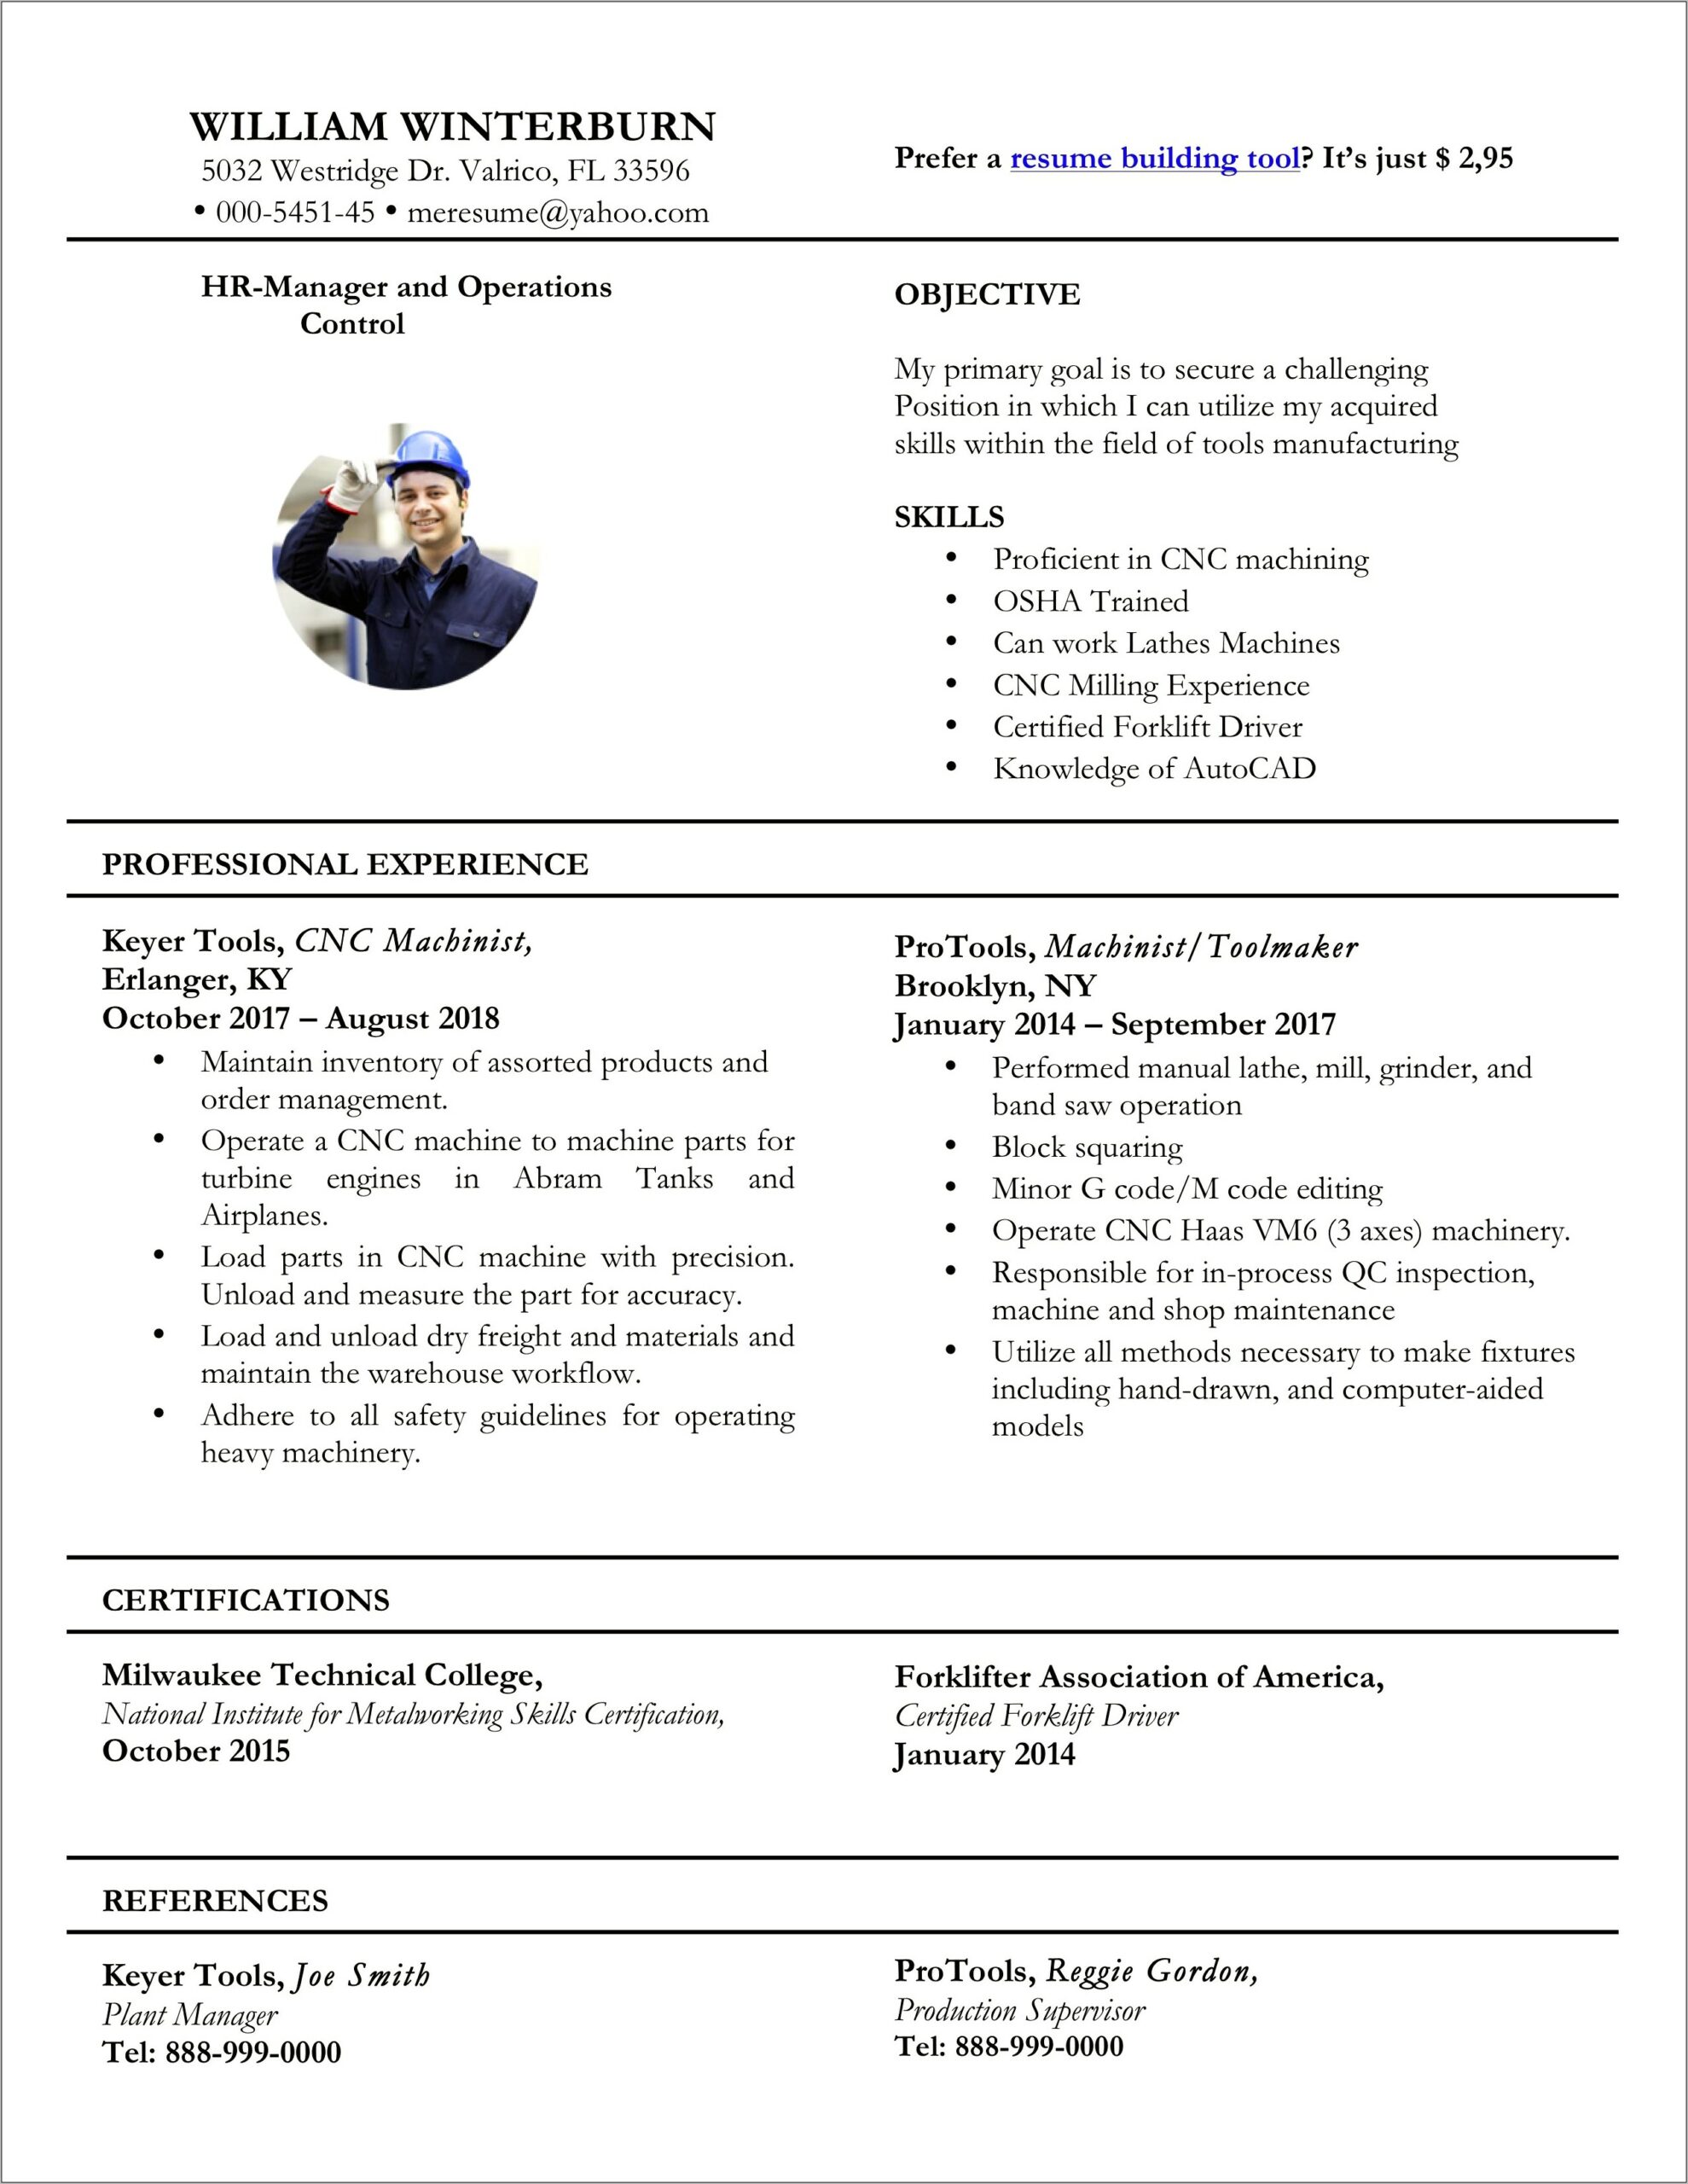 Job Application And Resume Format